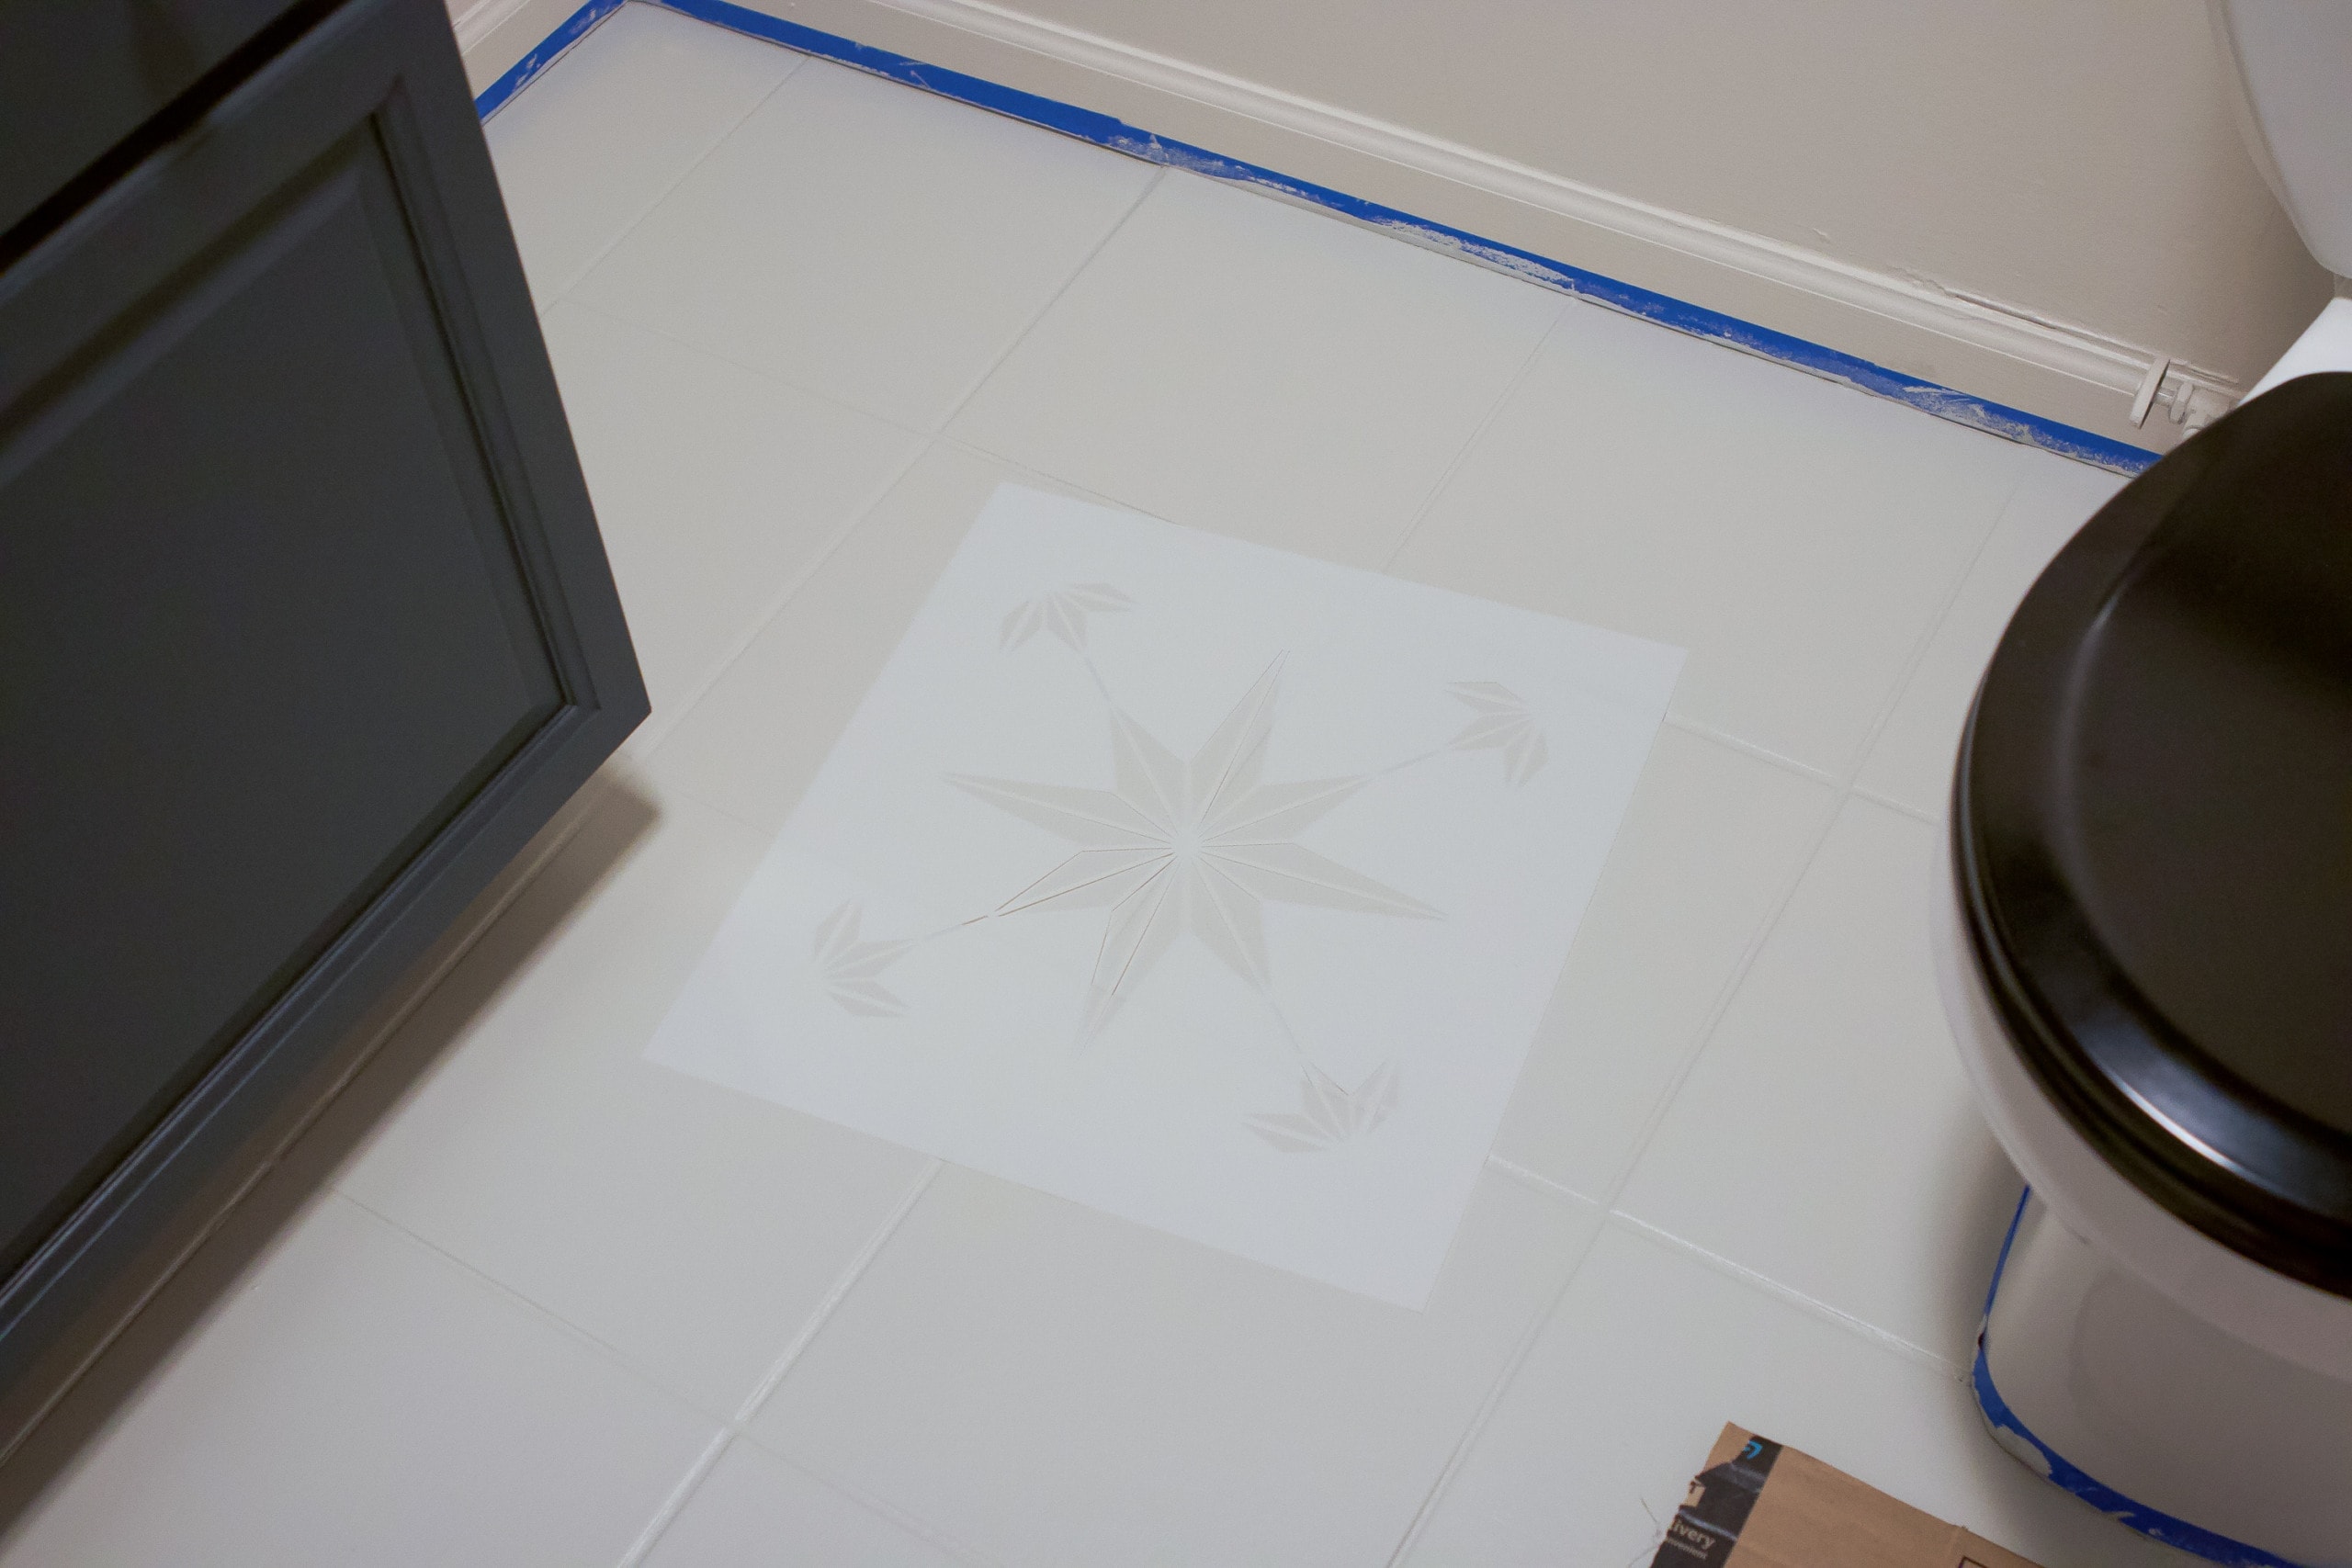 Figuring out what stencil to use when painting floor tile